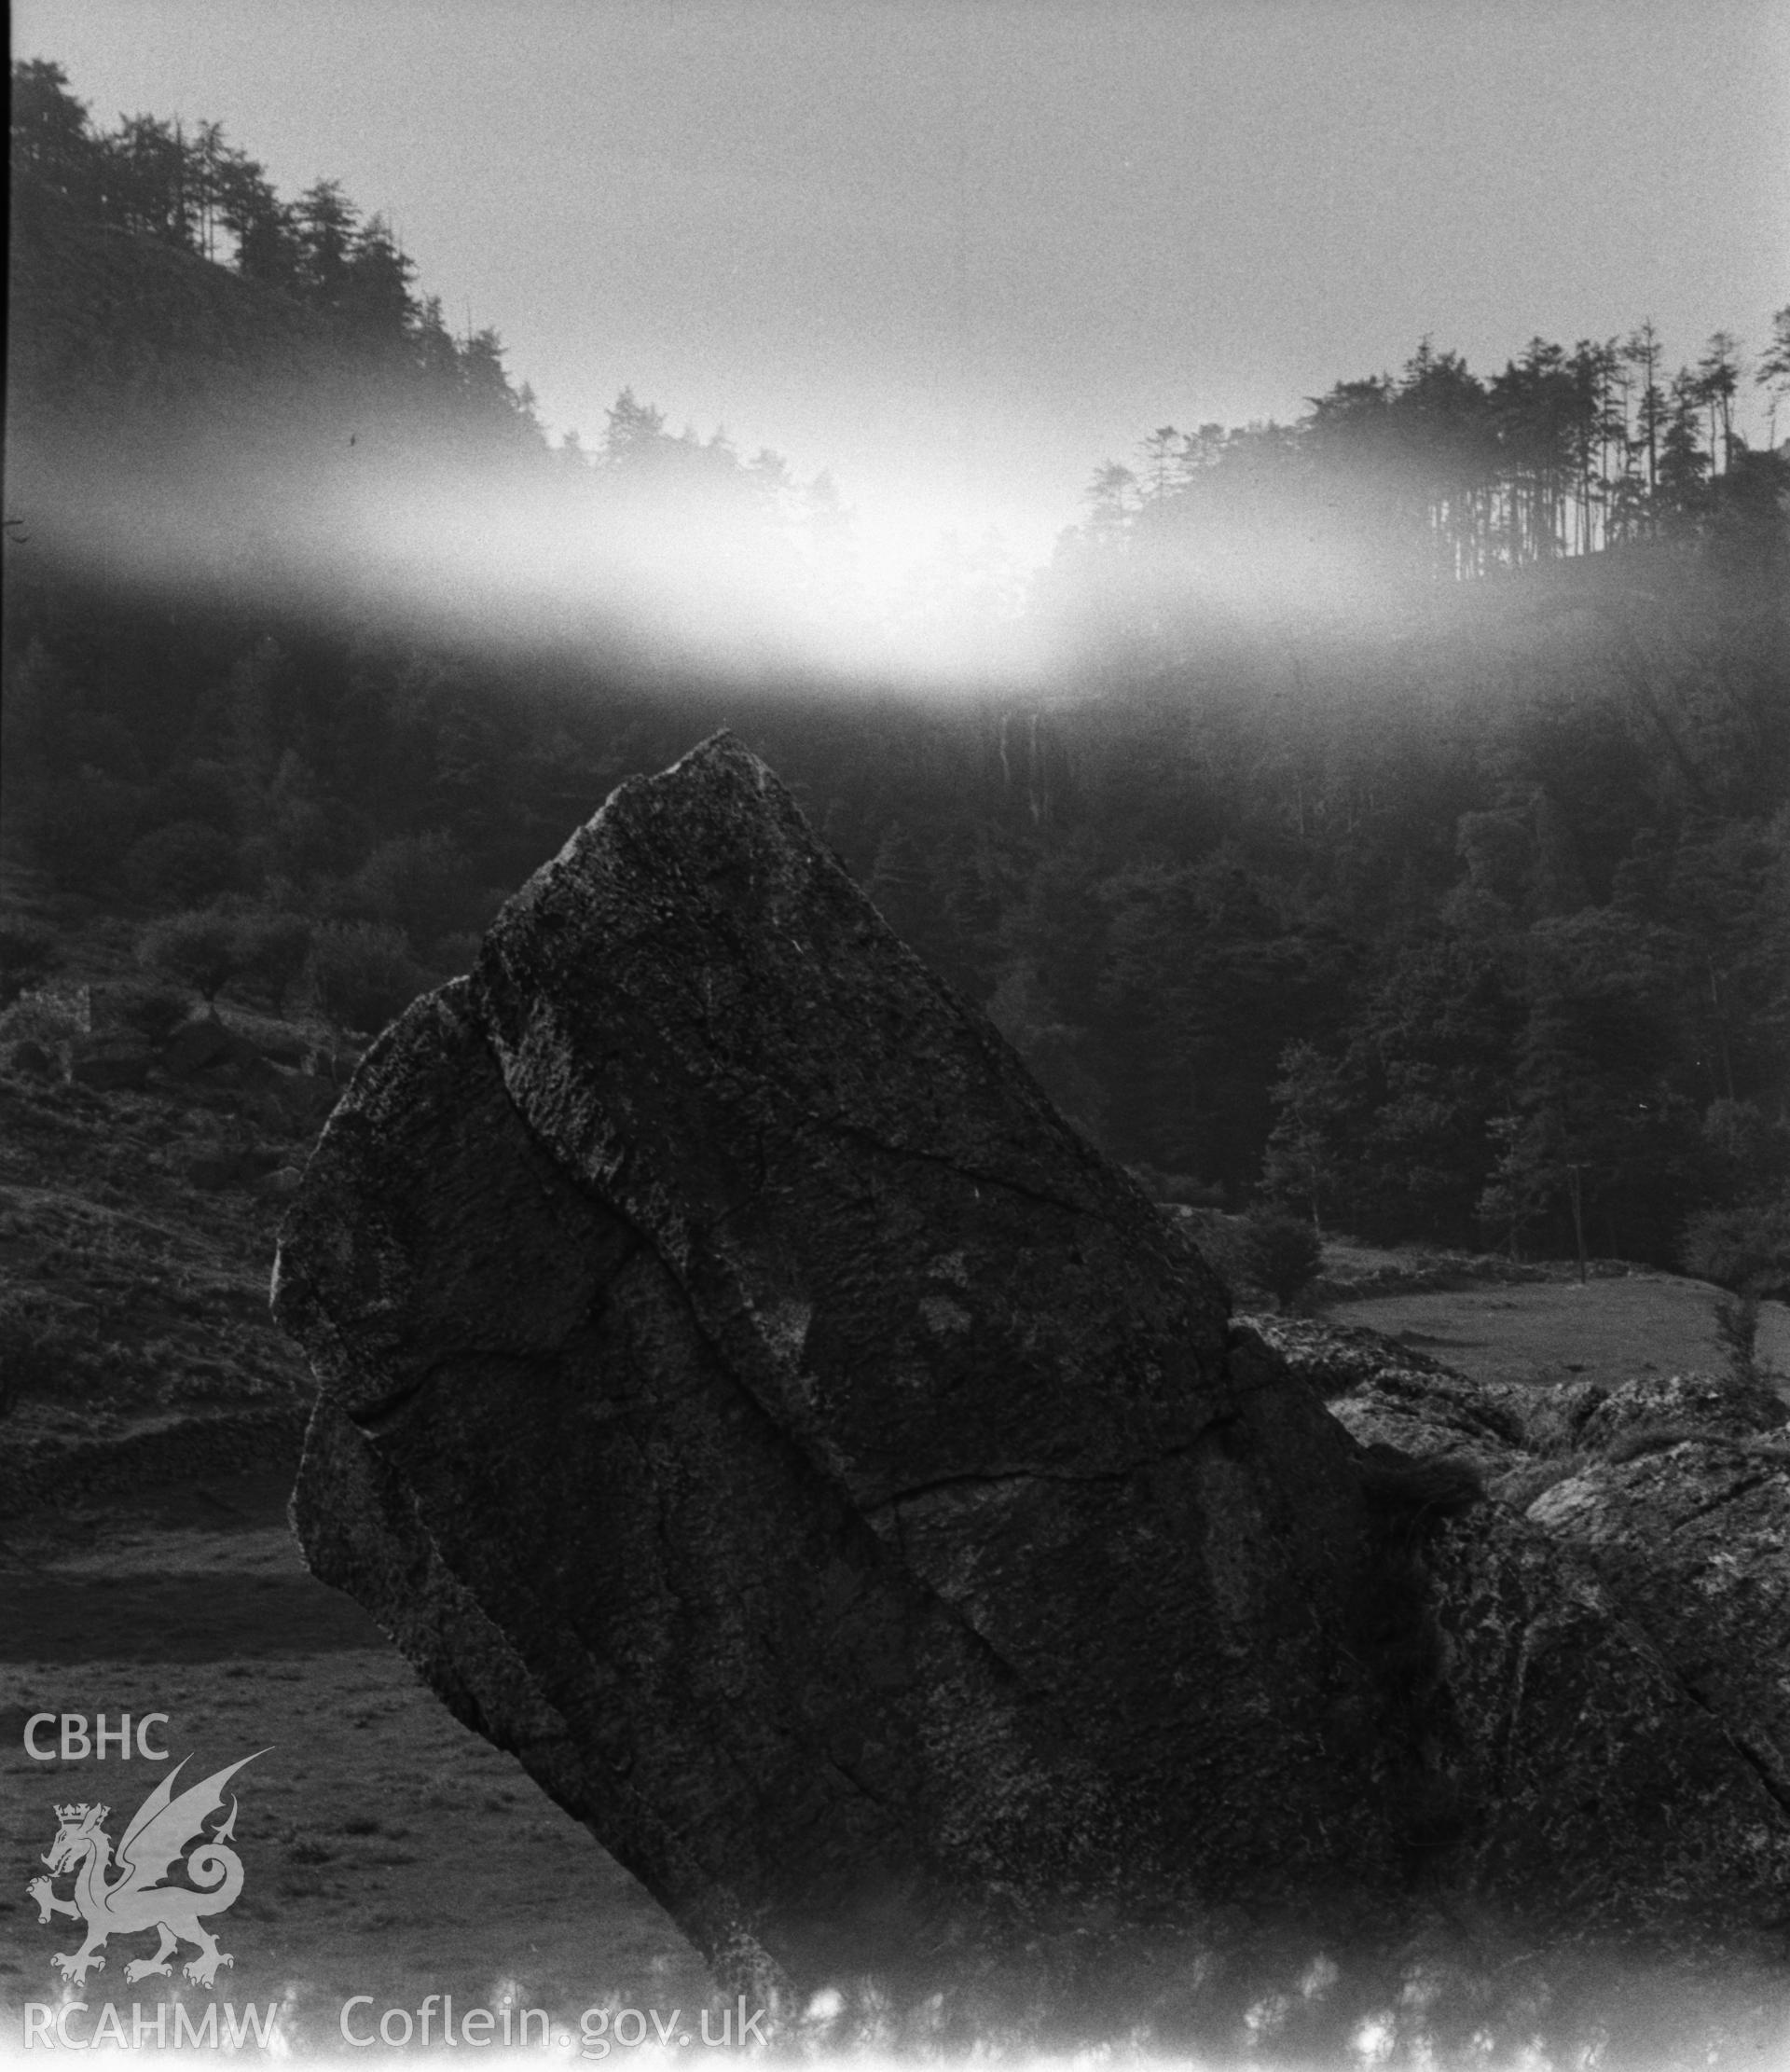 Digital copy of a black and white negative showing view of rock outcrop at Llanrhaeadr-ym-Mochnant. Photographed by Arthur O. Chater in September 1964.